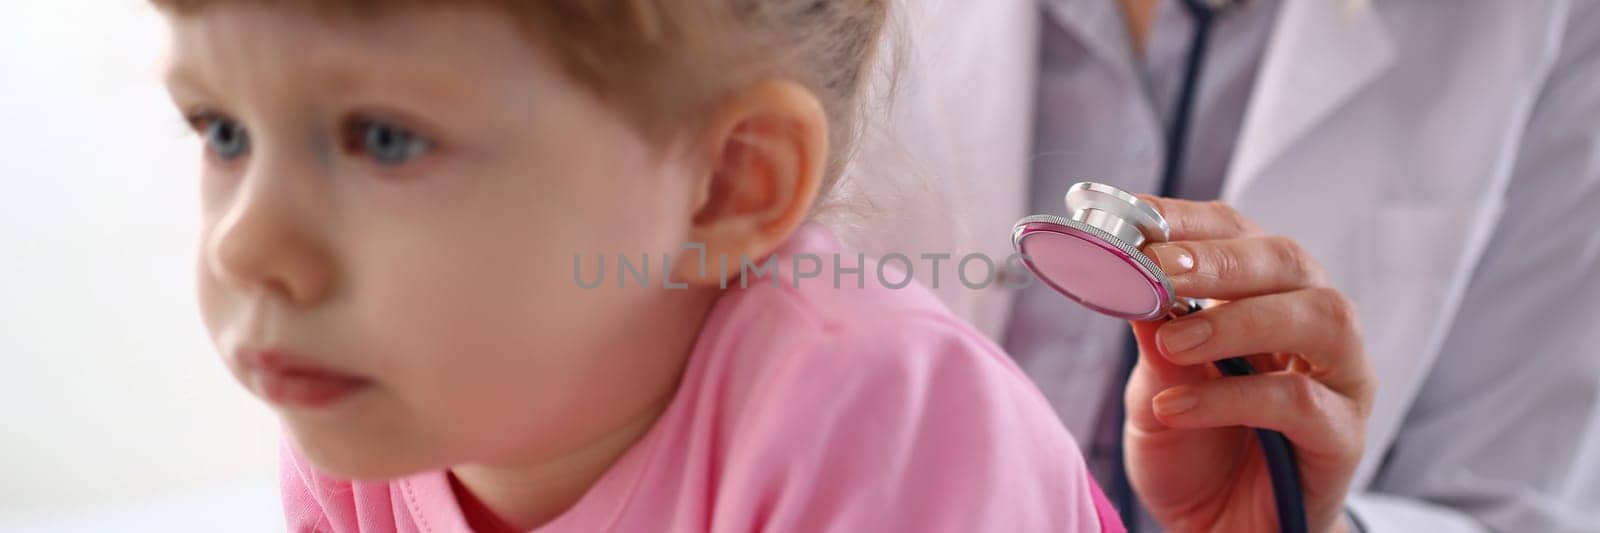 Pediatrician listens to lungs of little girl with stethoscope. Pediatrics medical services and child insurance concept